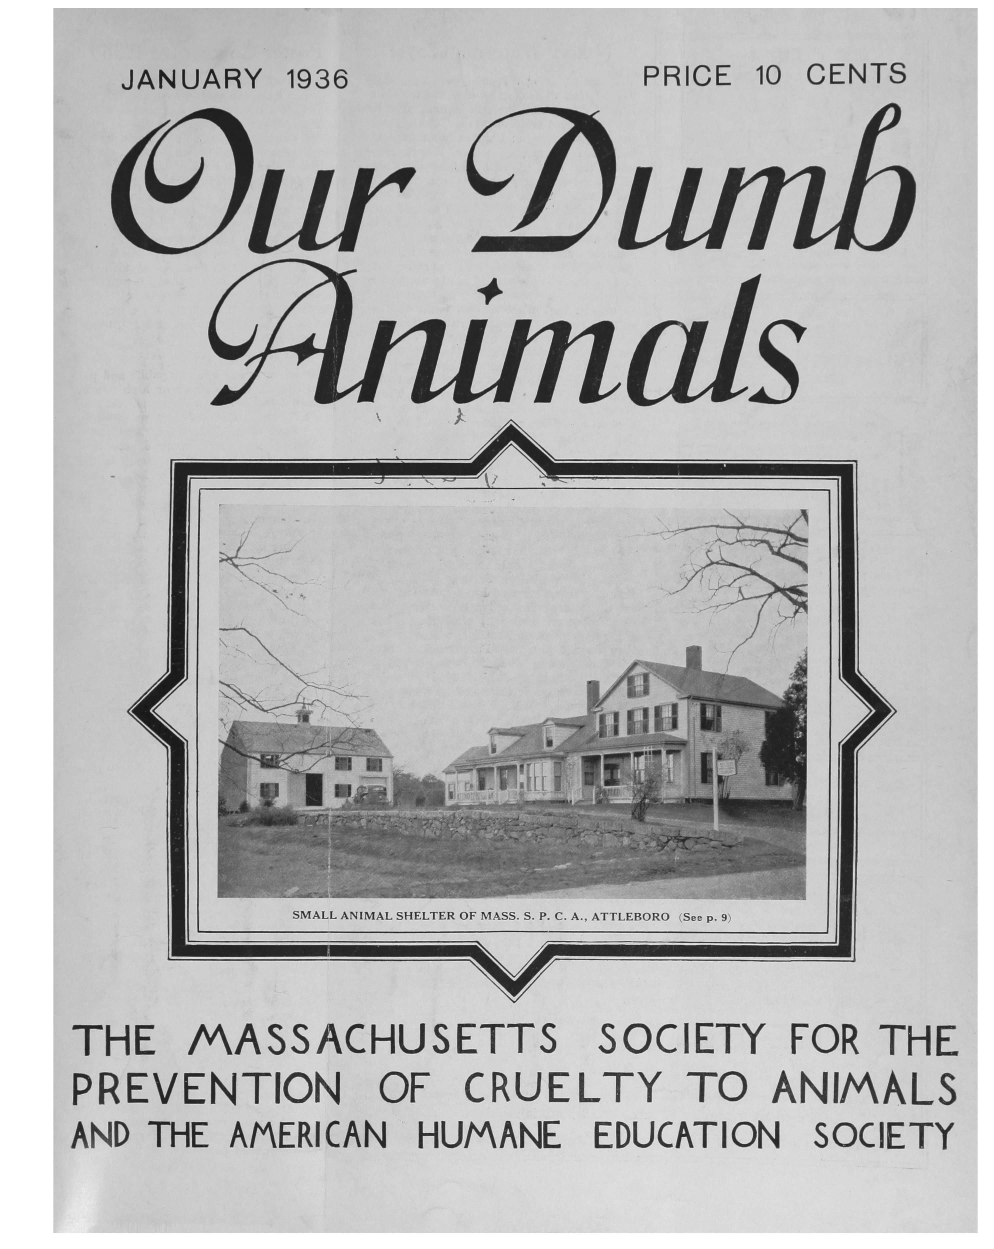 handle is hein.journals/animals69 and id is 1 raw text is: +          lTHE   MASSACHUSETTSPREVENTIONSOCIETY   FOR THEOF  CRUELTY TO ANIMALSAND THE AMERICAN HUMANE   EDUCATION  SOCIETYU>45K  N/SMALL ANIMAL SHELTER OF MASS. S. P. C. A., ATTLEBORO (See p. 9)Iil10 CENTSPRICEJANUARY 1936lyl /4d f,